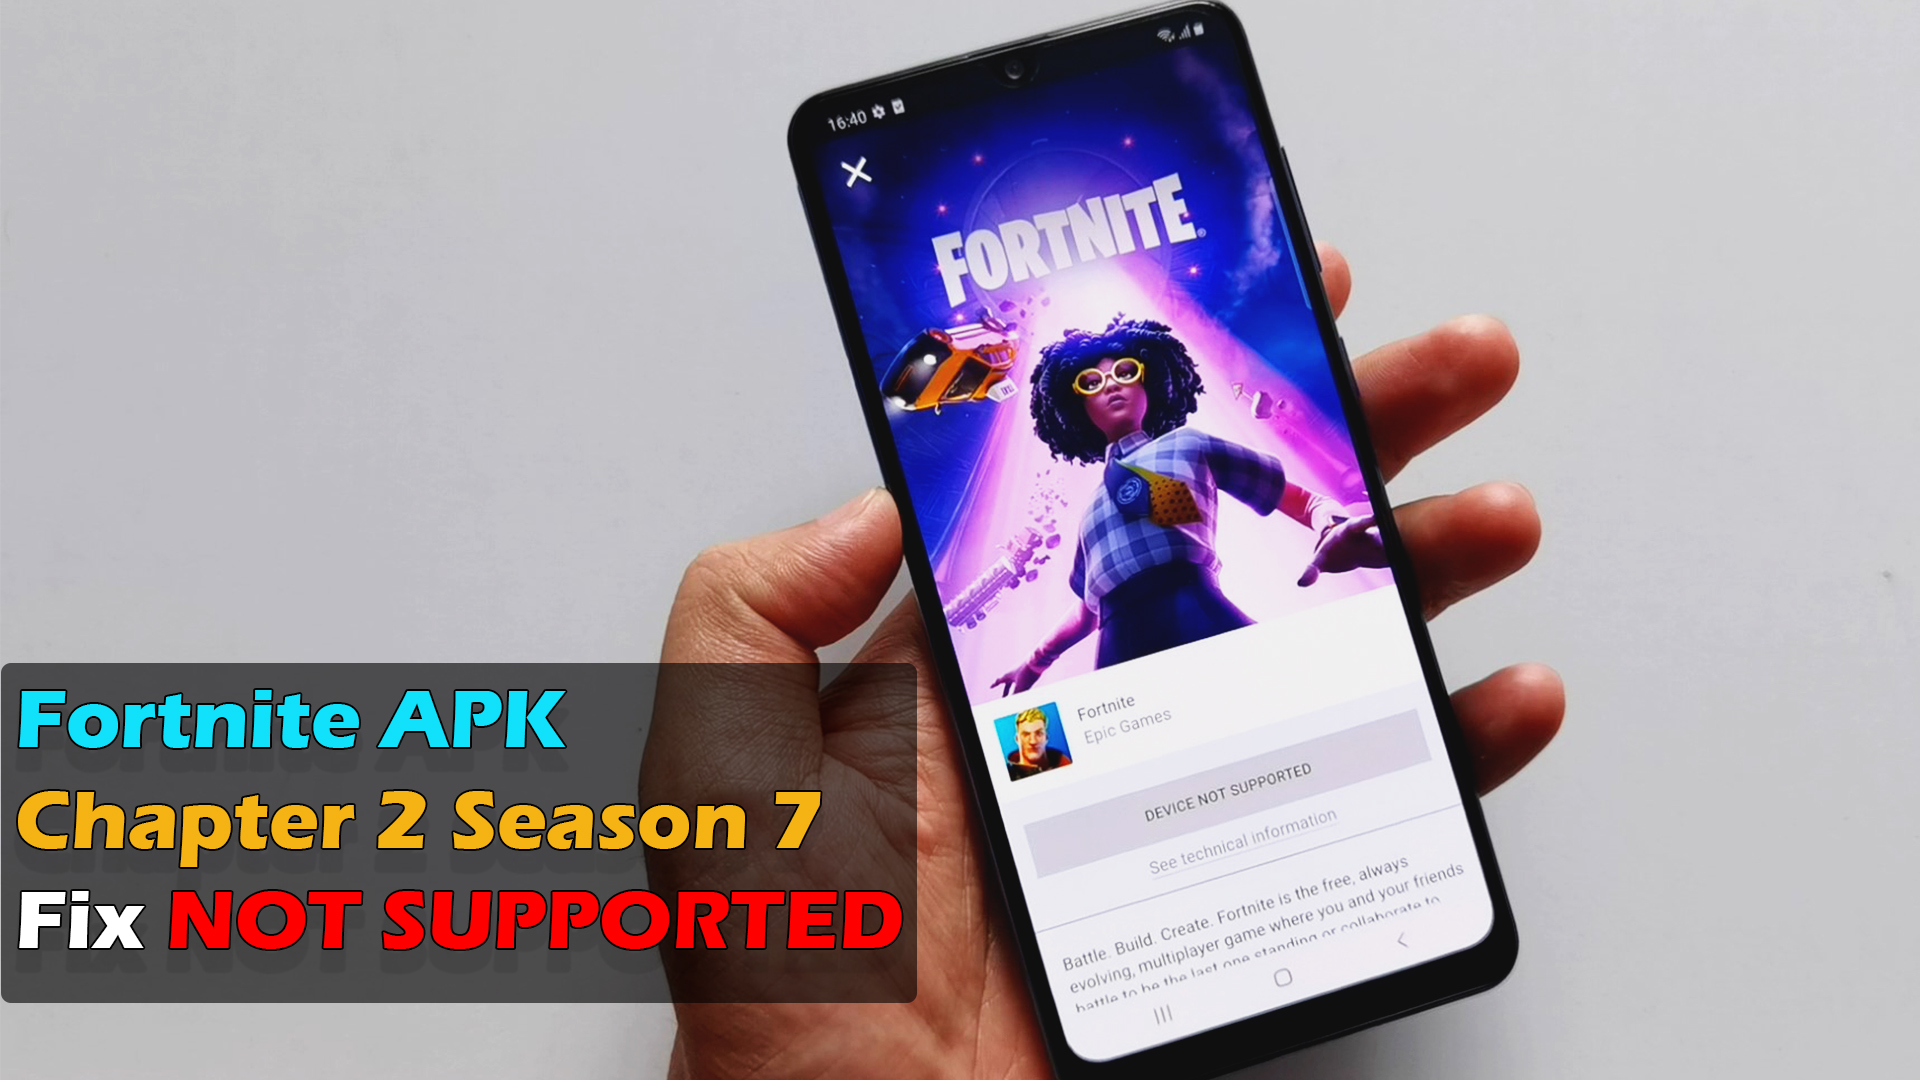 Fortnite Download Apk Chapter 2 Fortnite Apk Chapter 2 Season 7 For Any Android Fix Not Supported Apk Fix